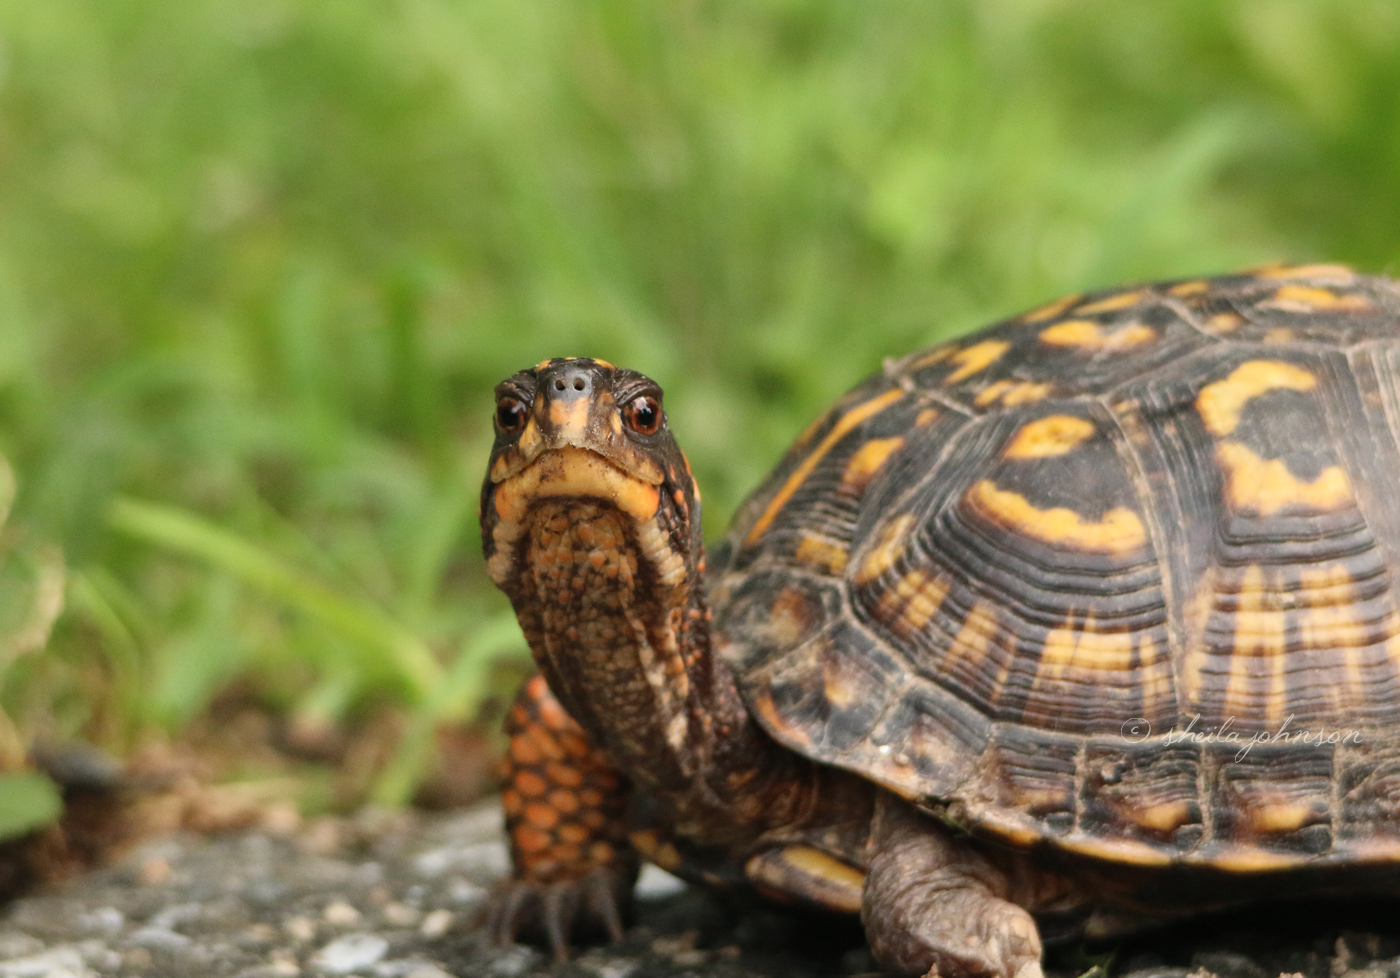 In 2011, The Eastern Box Turtle&#039;S Conservation Status Was Changed From Near Threatened To Vulnerable, As The Name Implies, They Can Be Found All Along The Eastern Coast Of The United States. This One Calls Mariner Point Park, Joppa, Maryland Home.